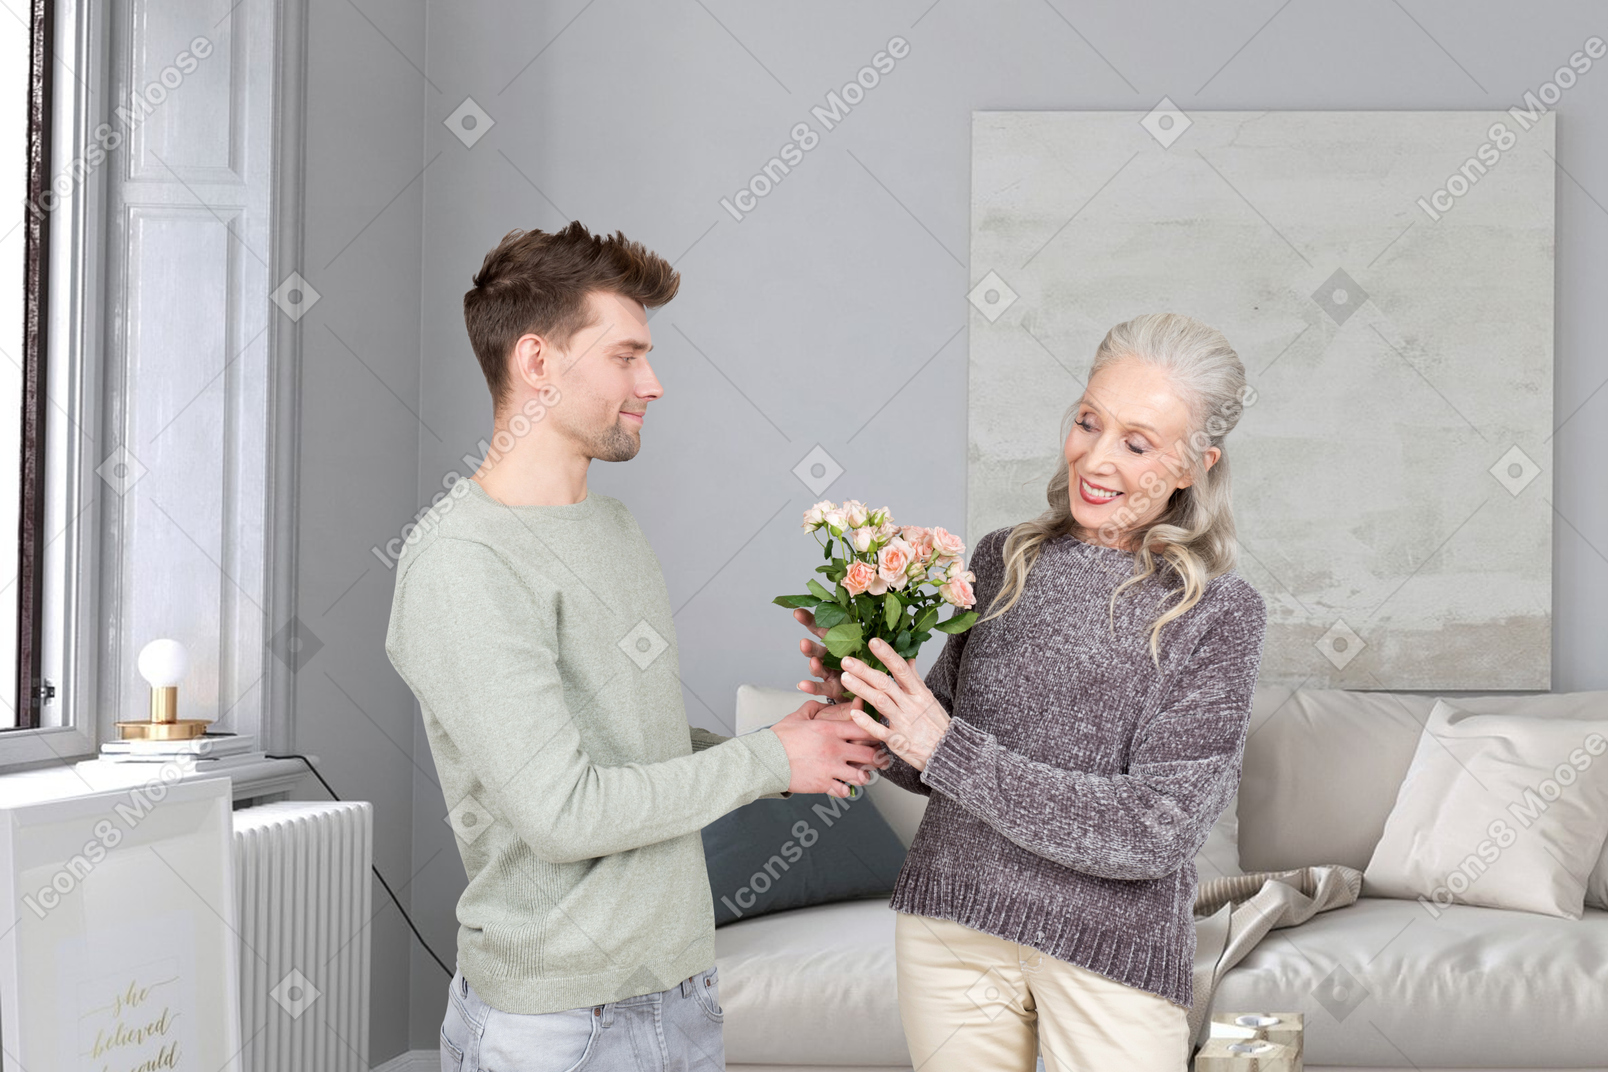 A man giving a woman a bouquet of flowers